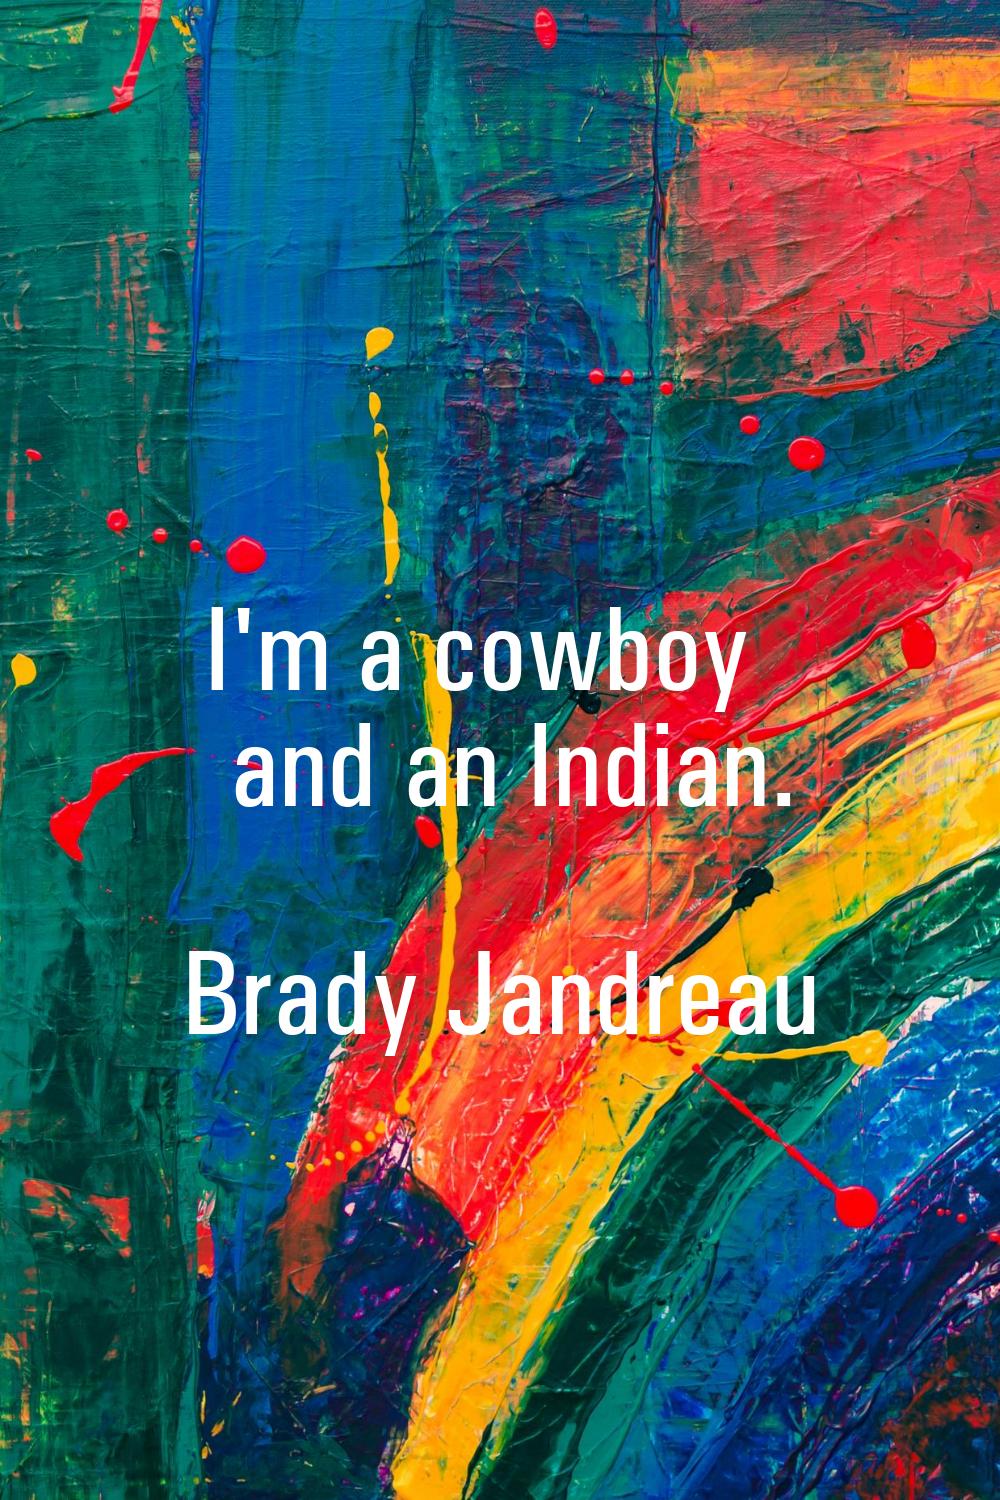 I'm a cowboy and an Indian.